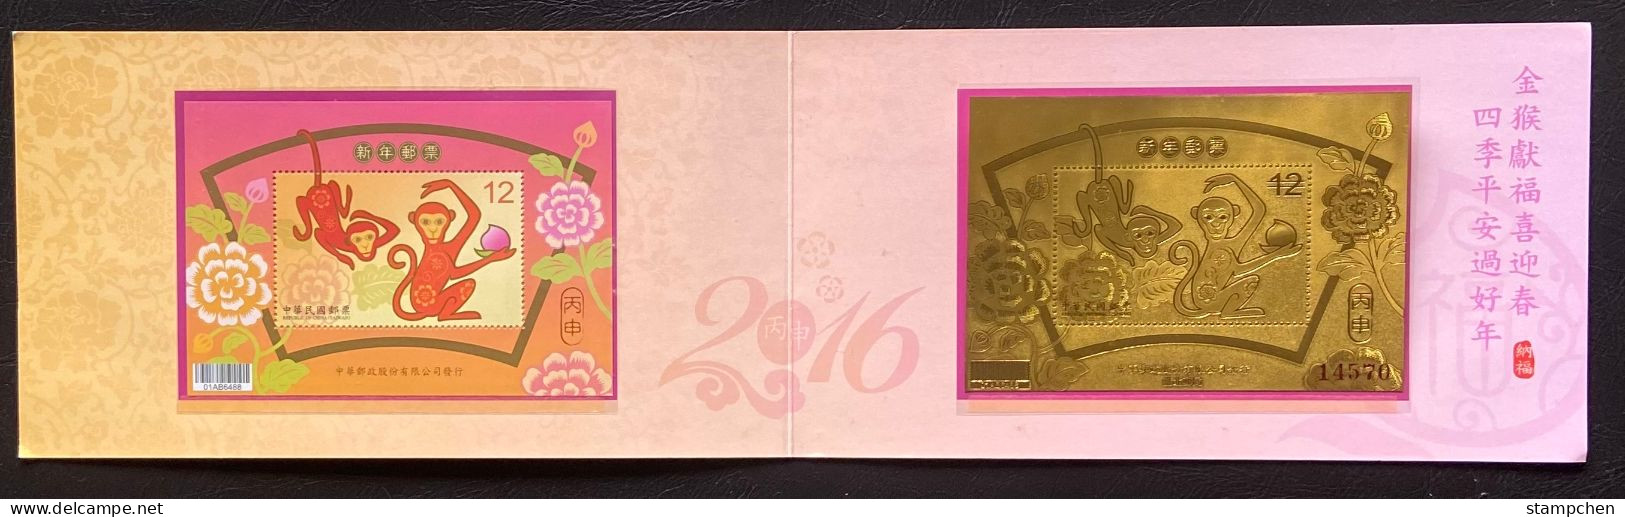 Folder Gold Foil Taiwan 2015 Chinese New Year Zodiac Stamp S/s-Monkey Peach Fruit Peony Flower (Taipei) Unusual 2016 - Unused Stamps